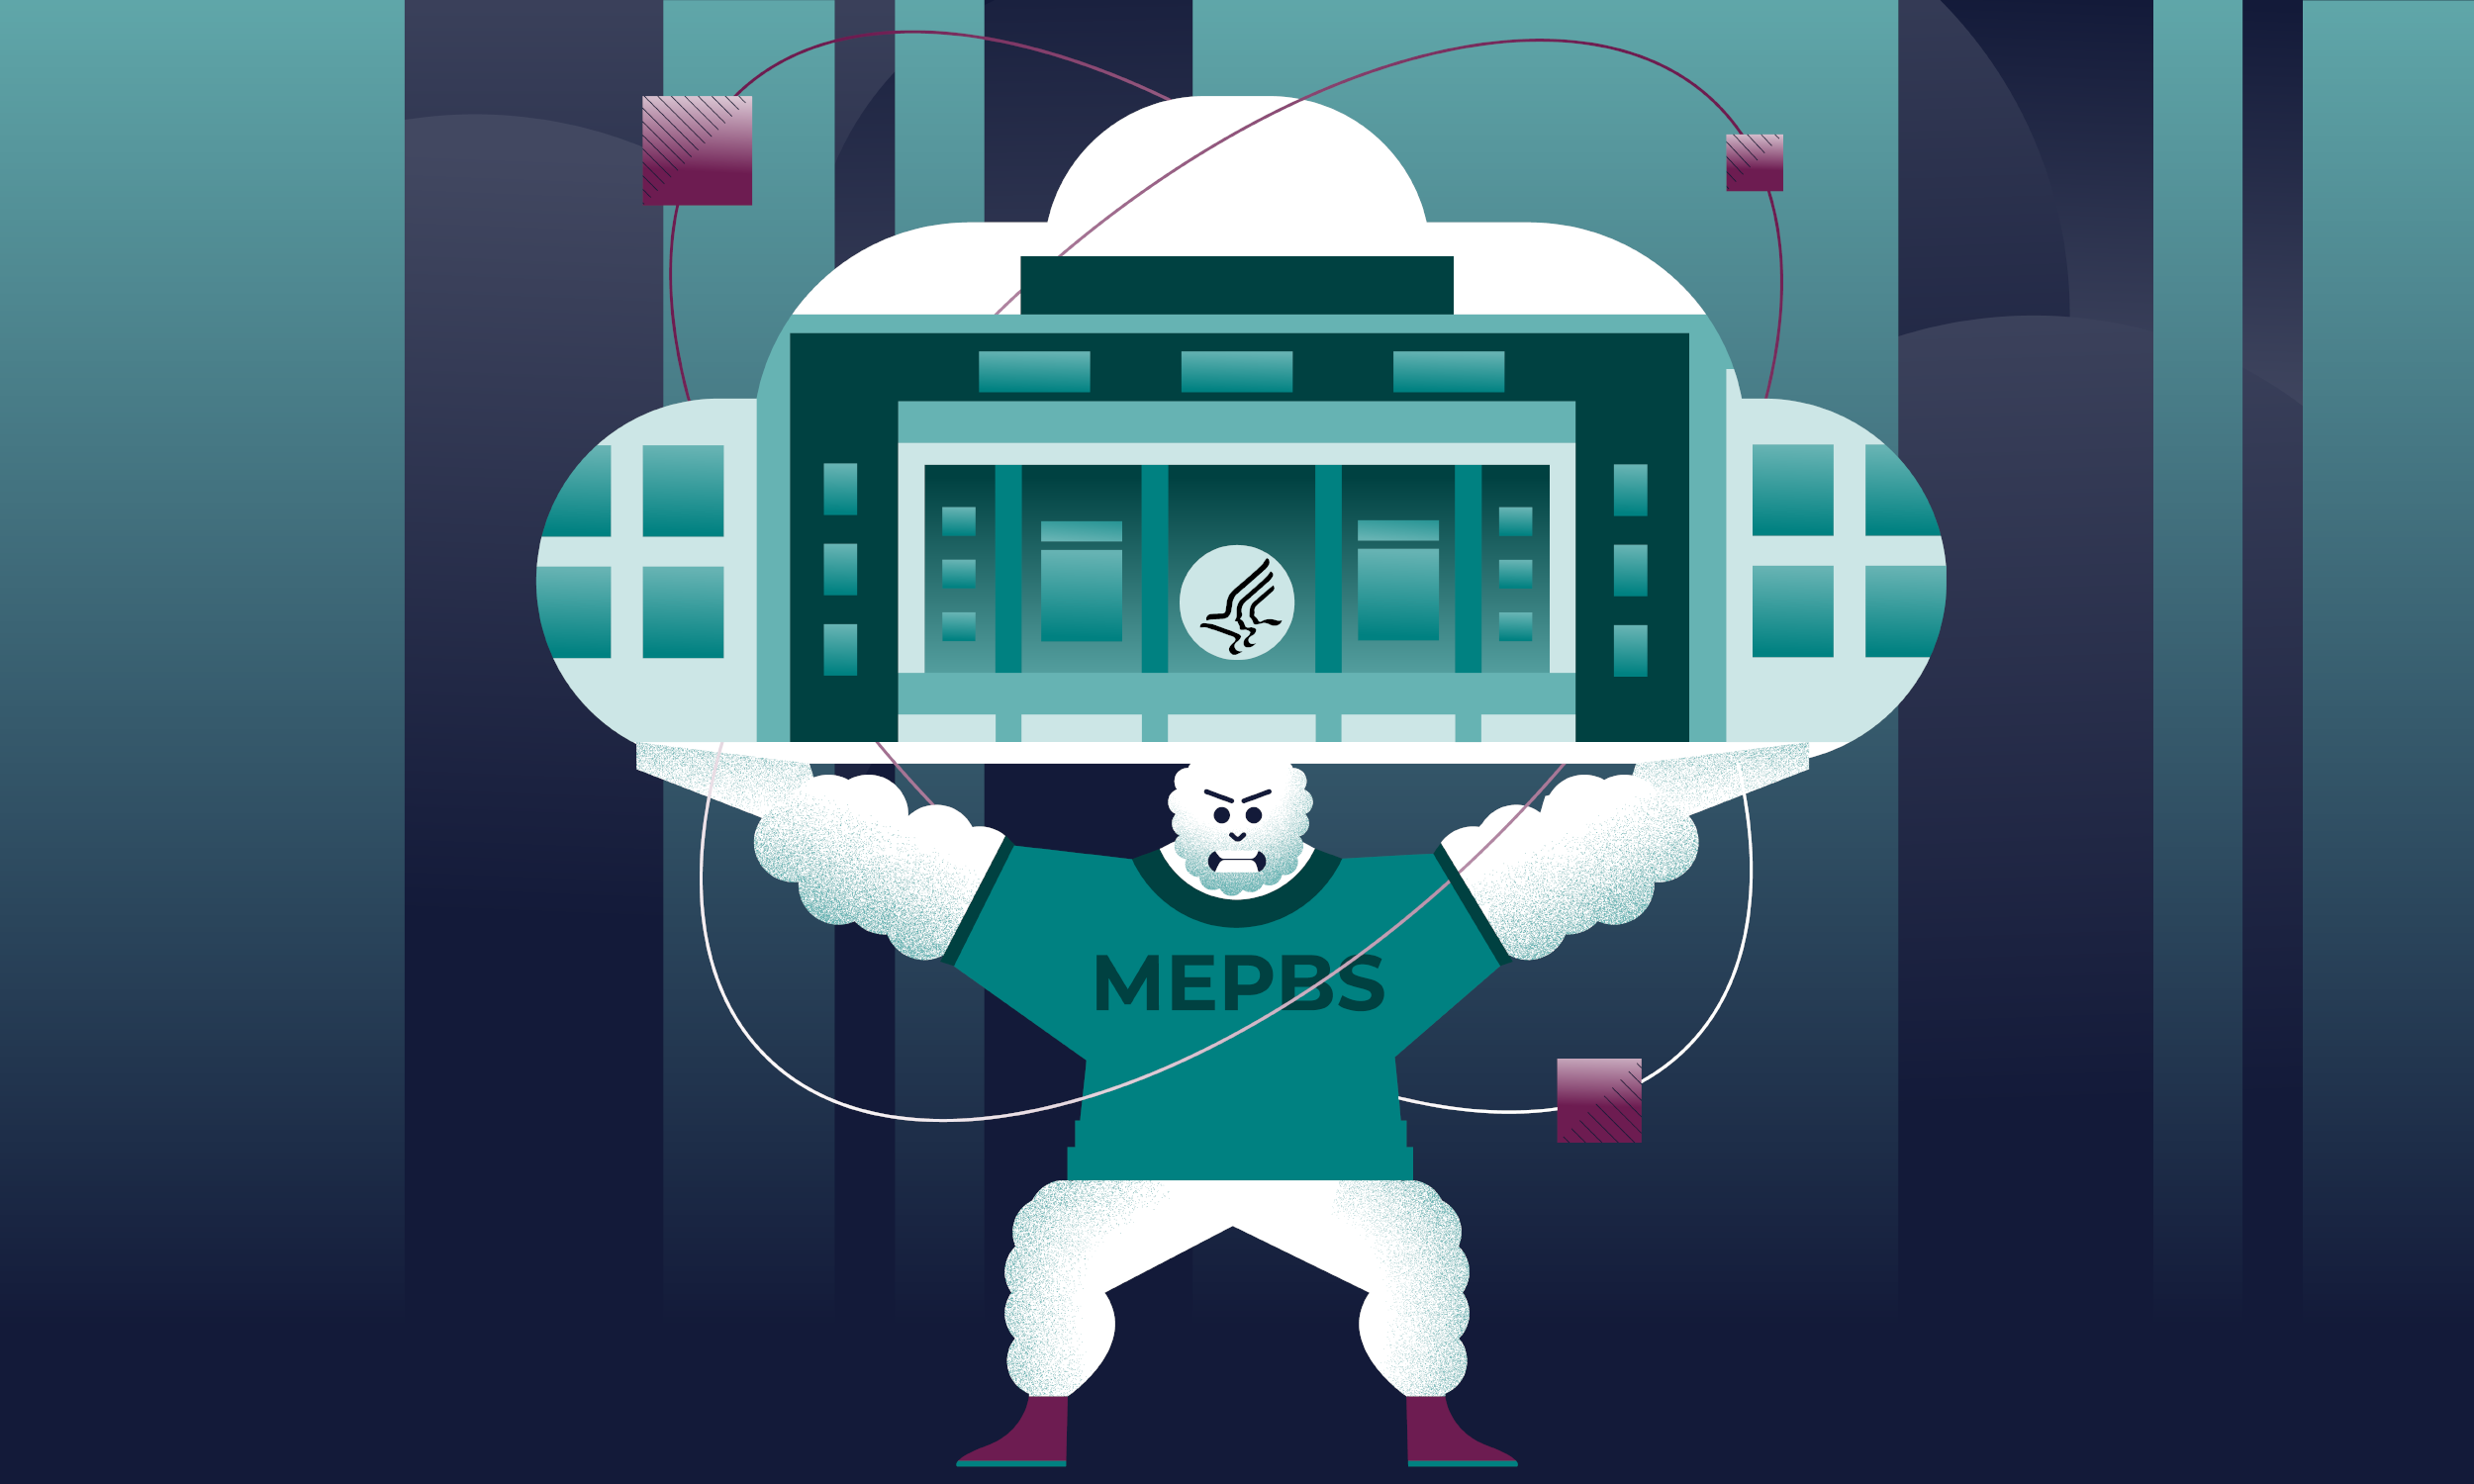 Graphic of a very muscular person with a T-shirt reading "MEPBS" lifting up the CMS Headquarters building.